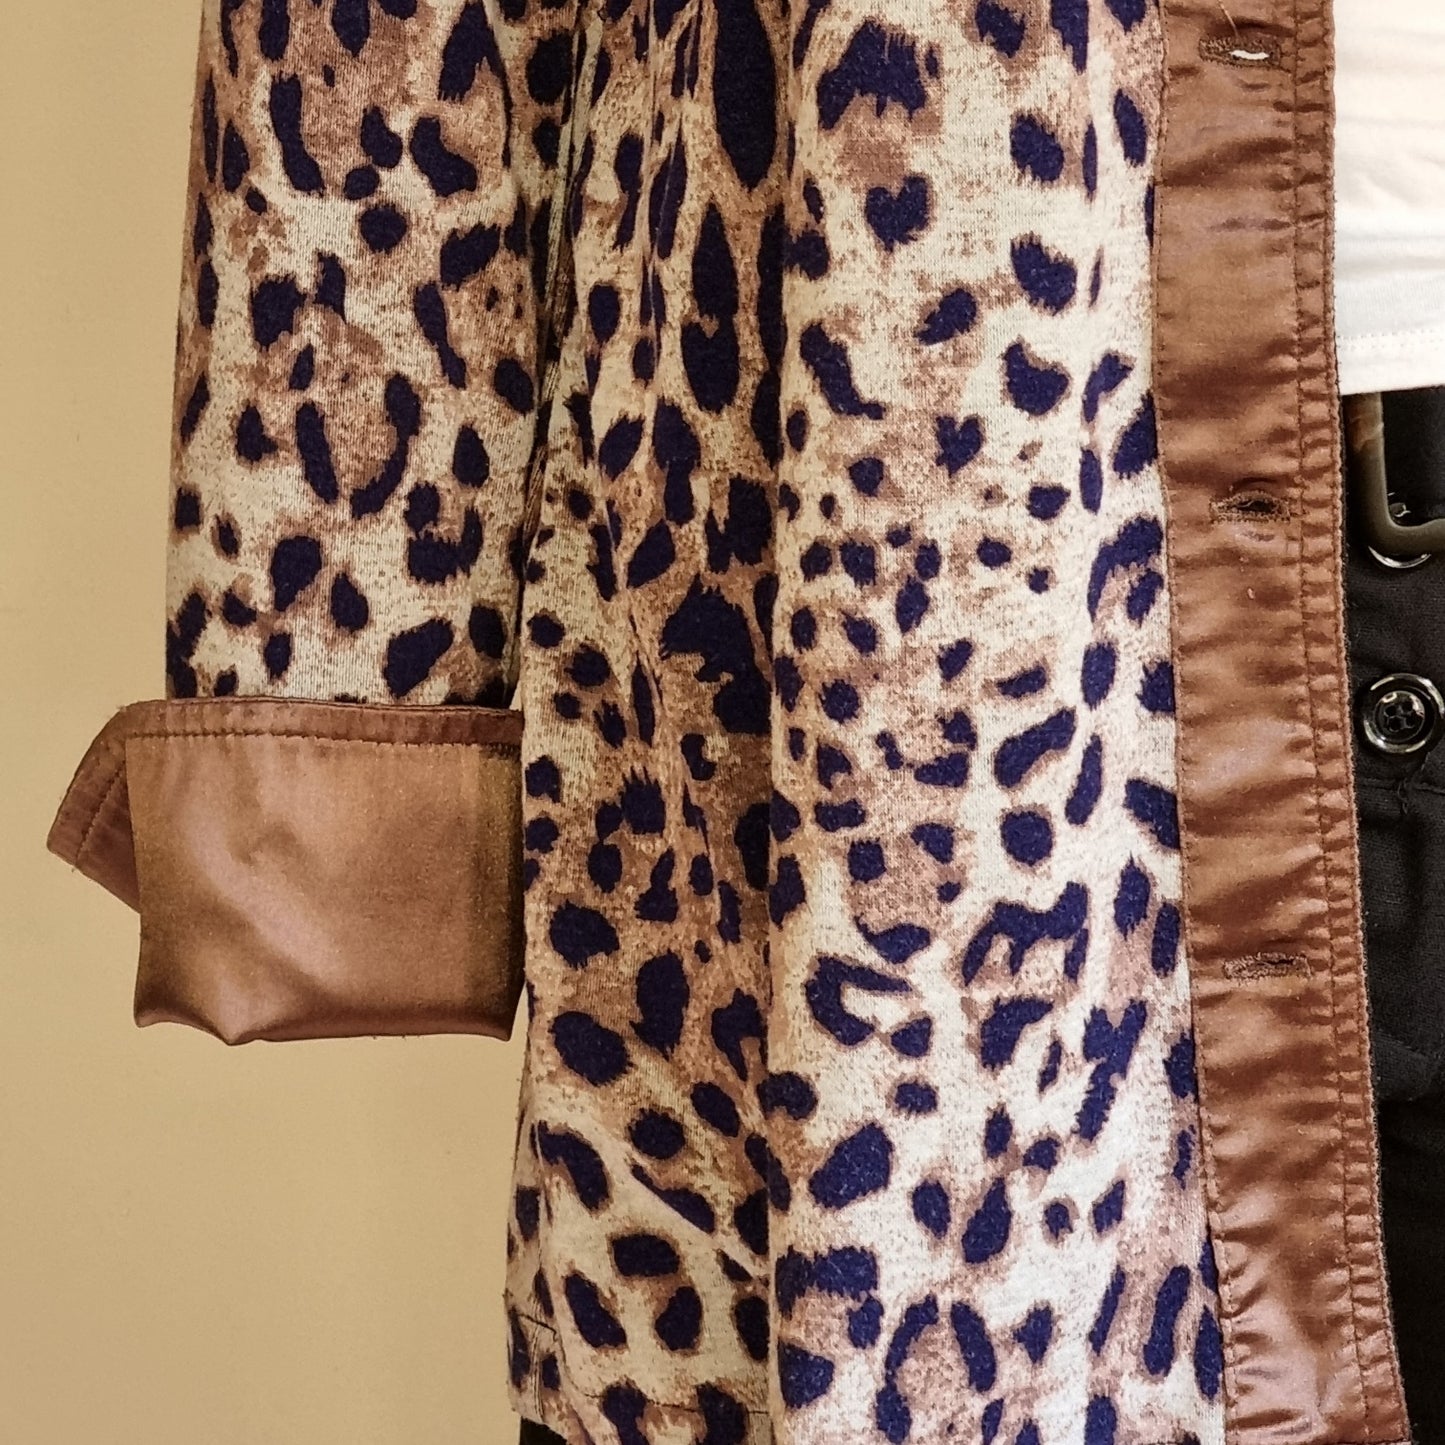 Classic Long sleeve leopard print shirt/jacket with cuff sleeves